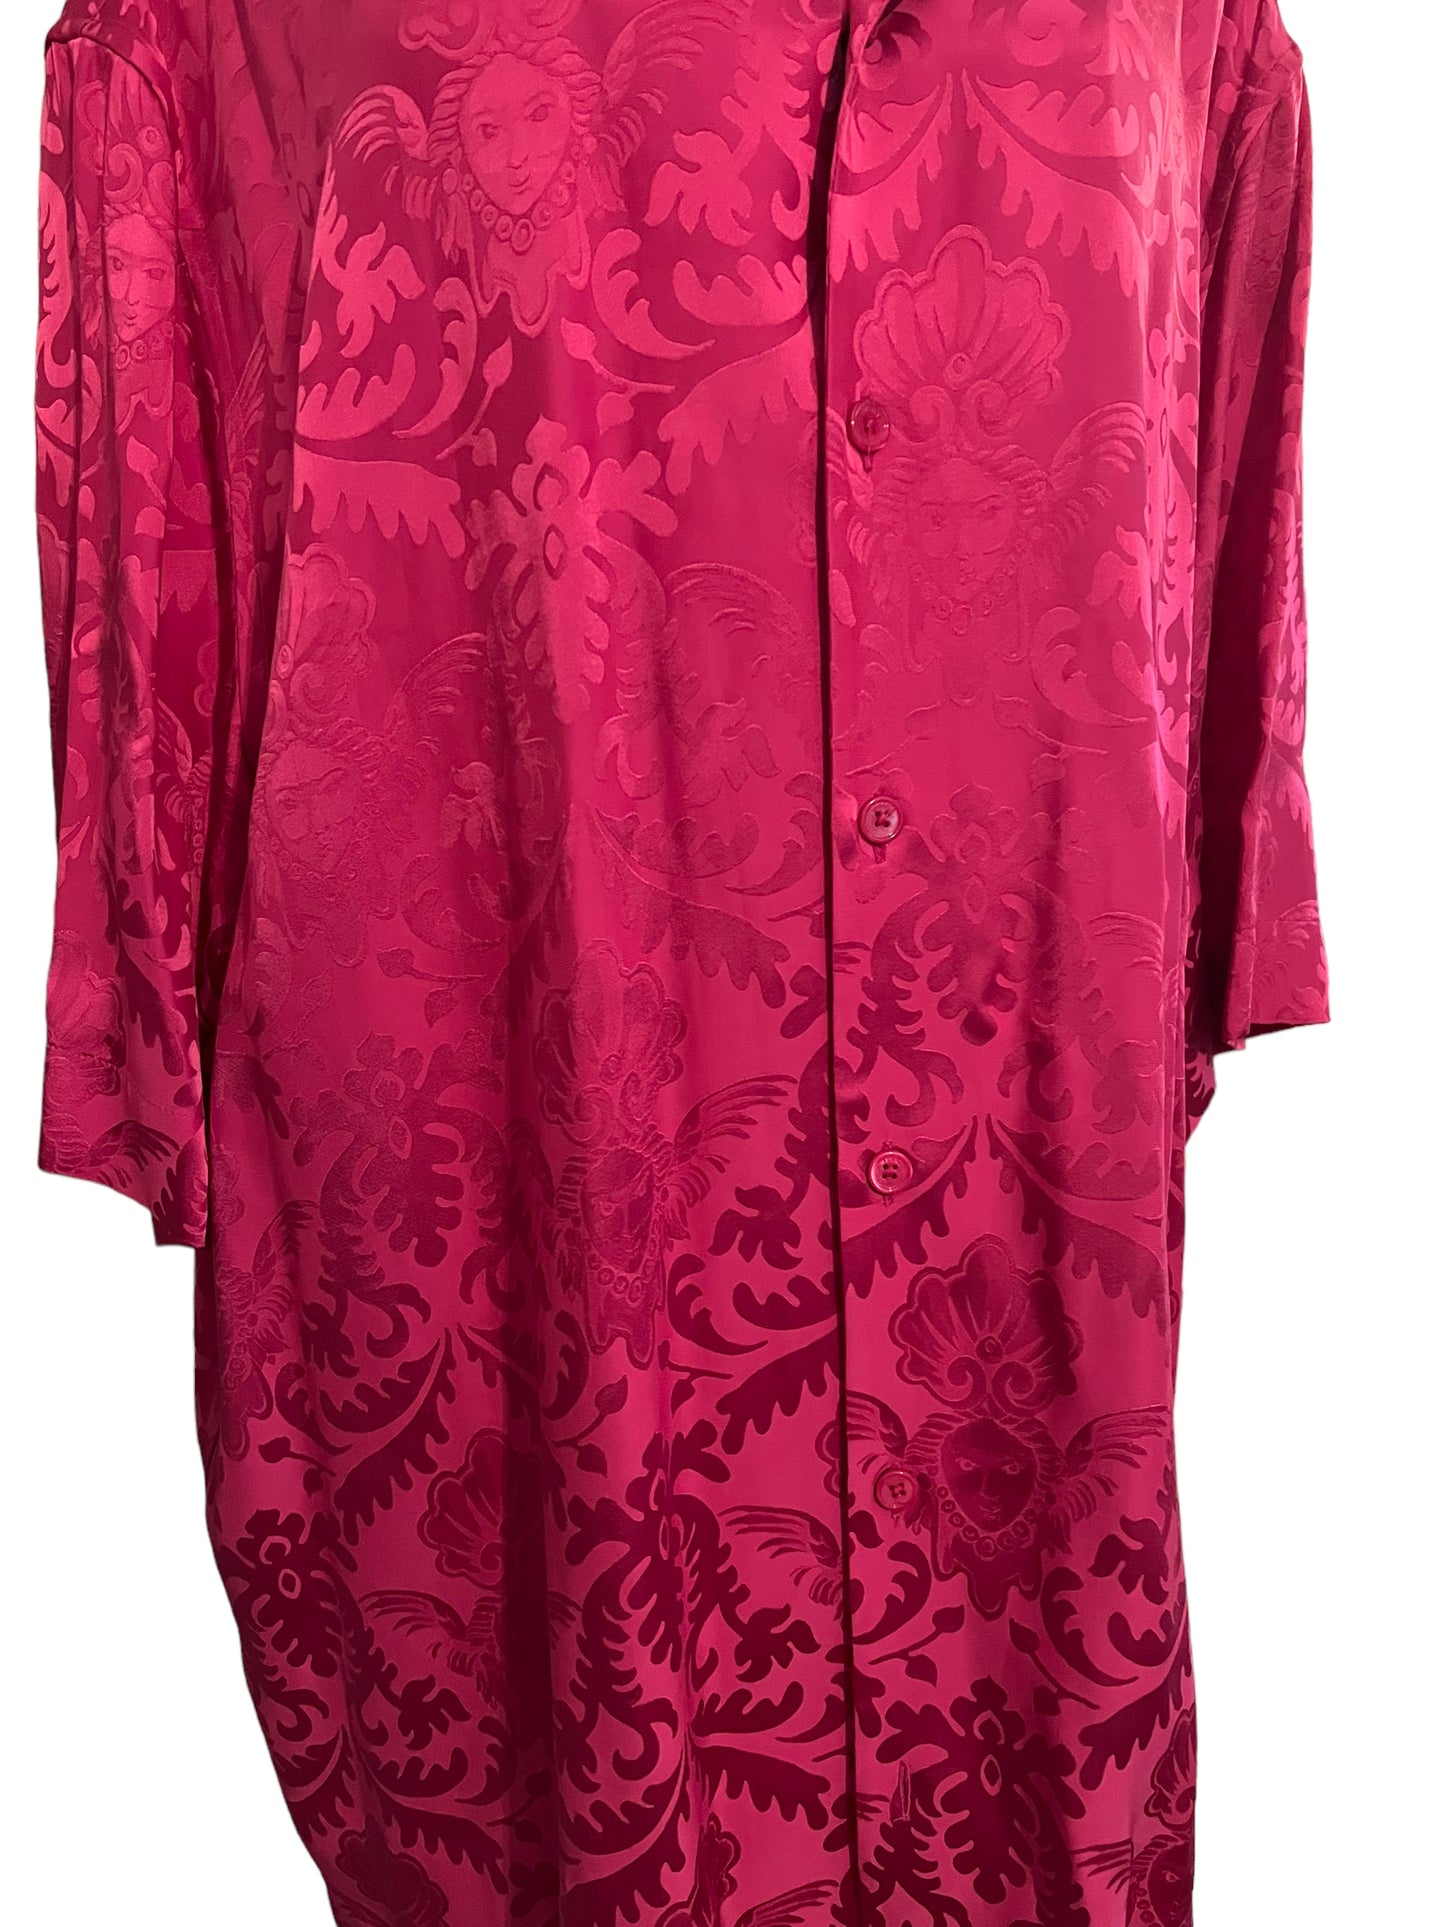 Versace Size 43 Pink Silk Floral Scroll Print Top